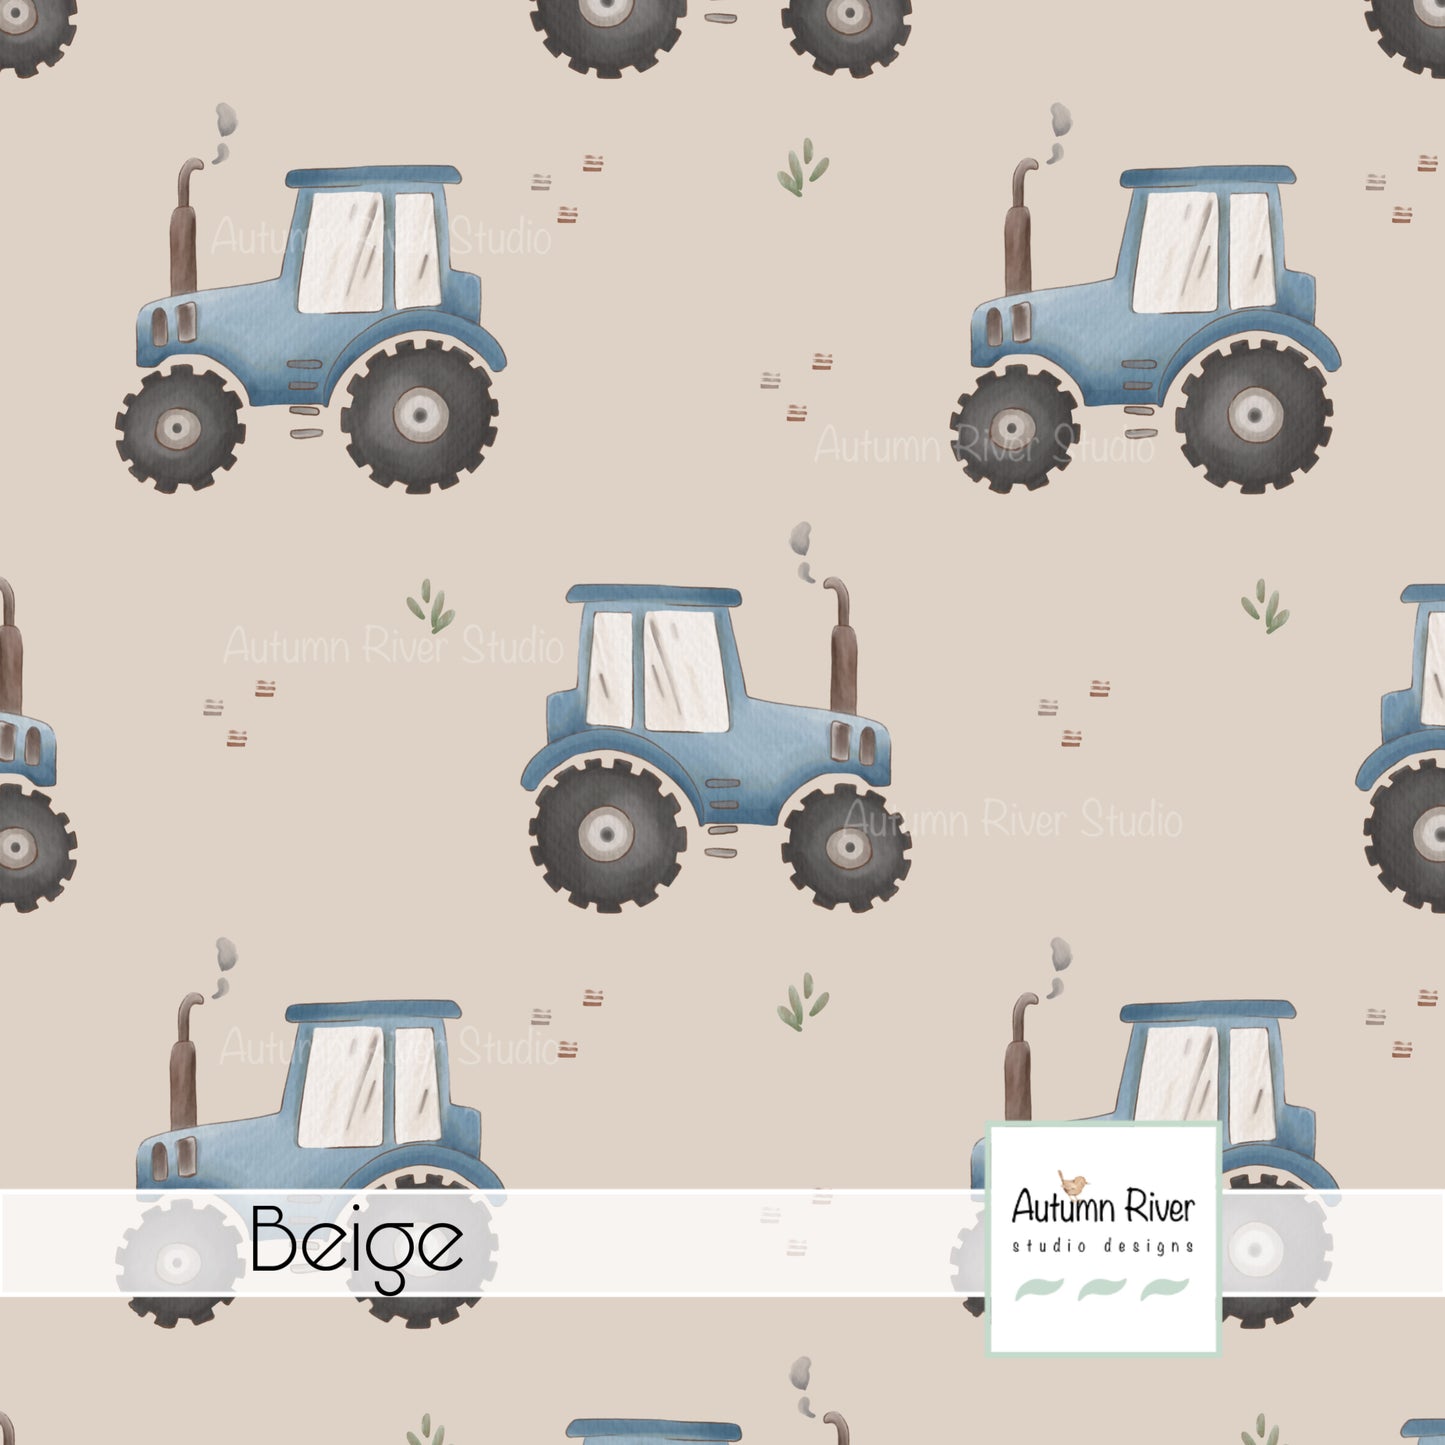 Autumn River Studio - Blue Tractors on Beige - Coordinating Fabric Available